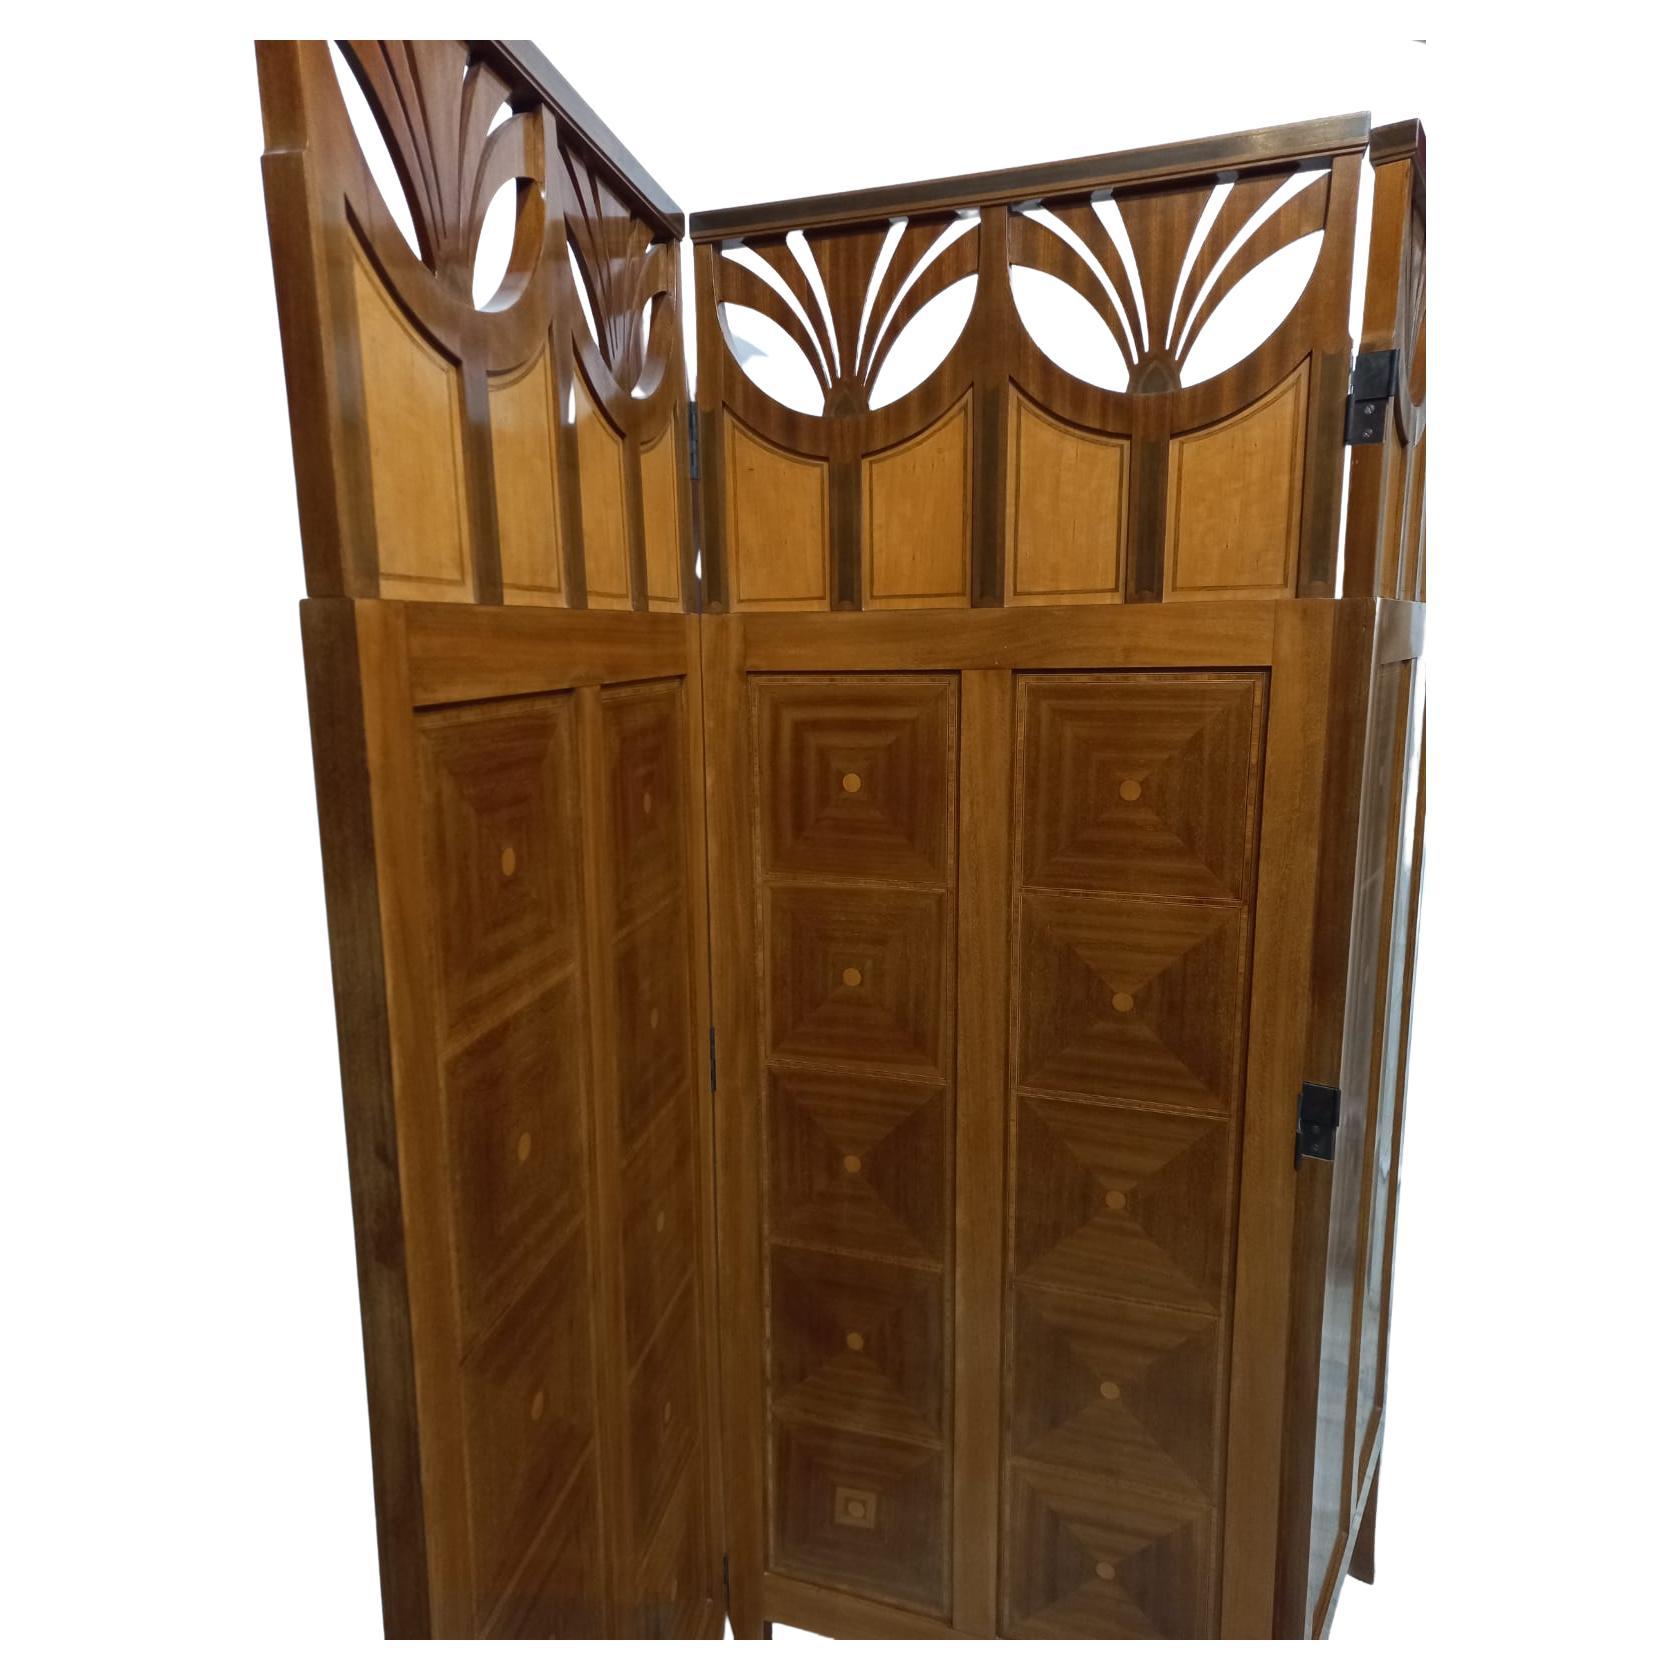 Art Deco screen made of solid wood For Sale 3